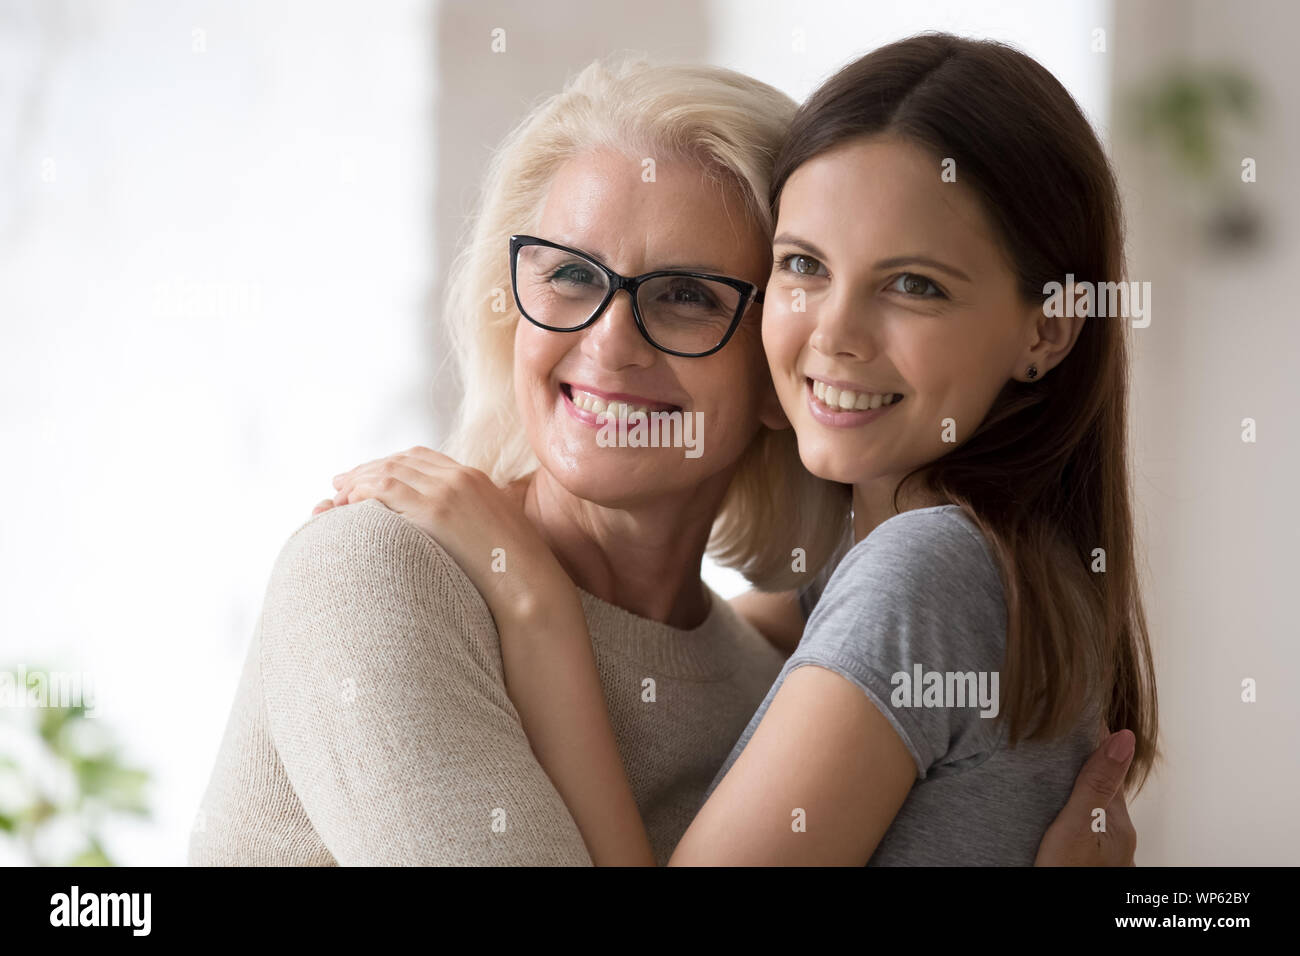 Smiling mother and daughter posing for picture together Stock Photo